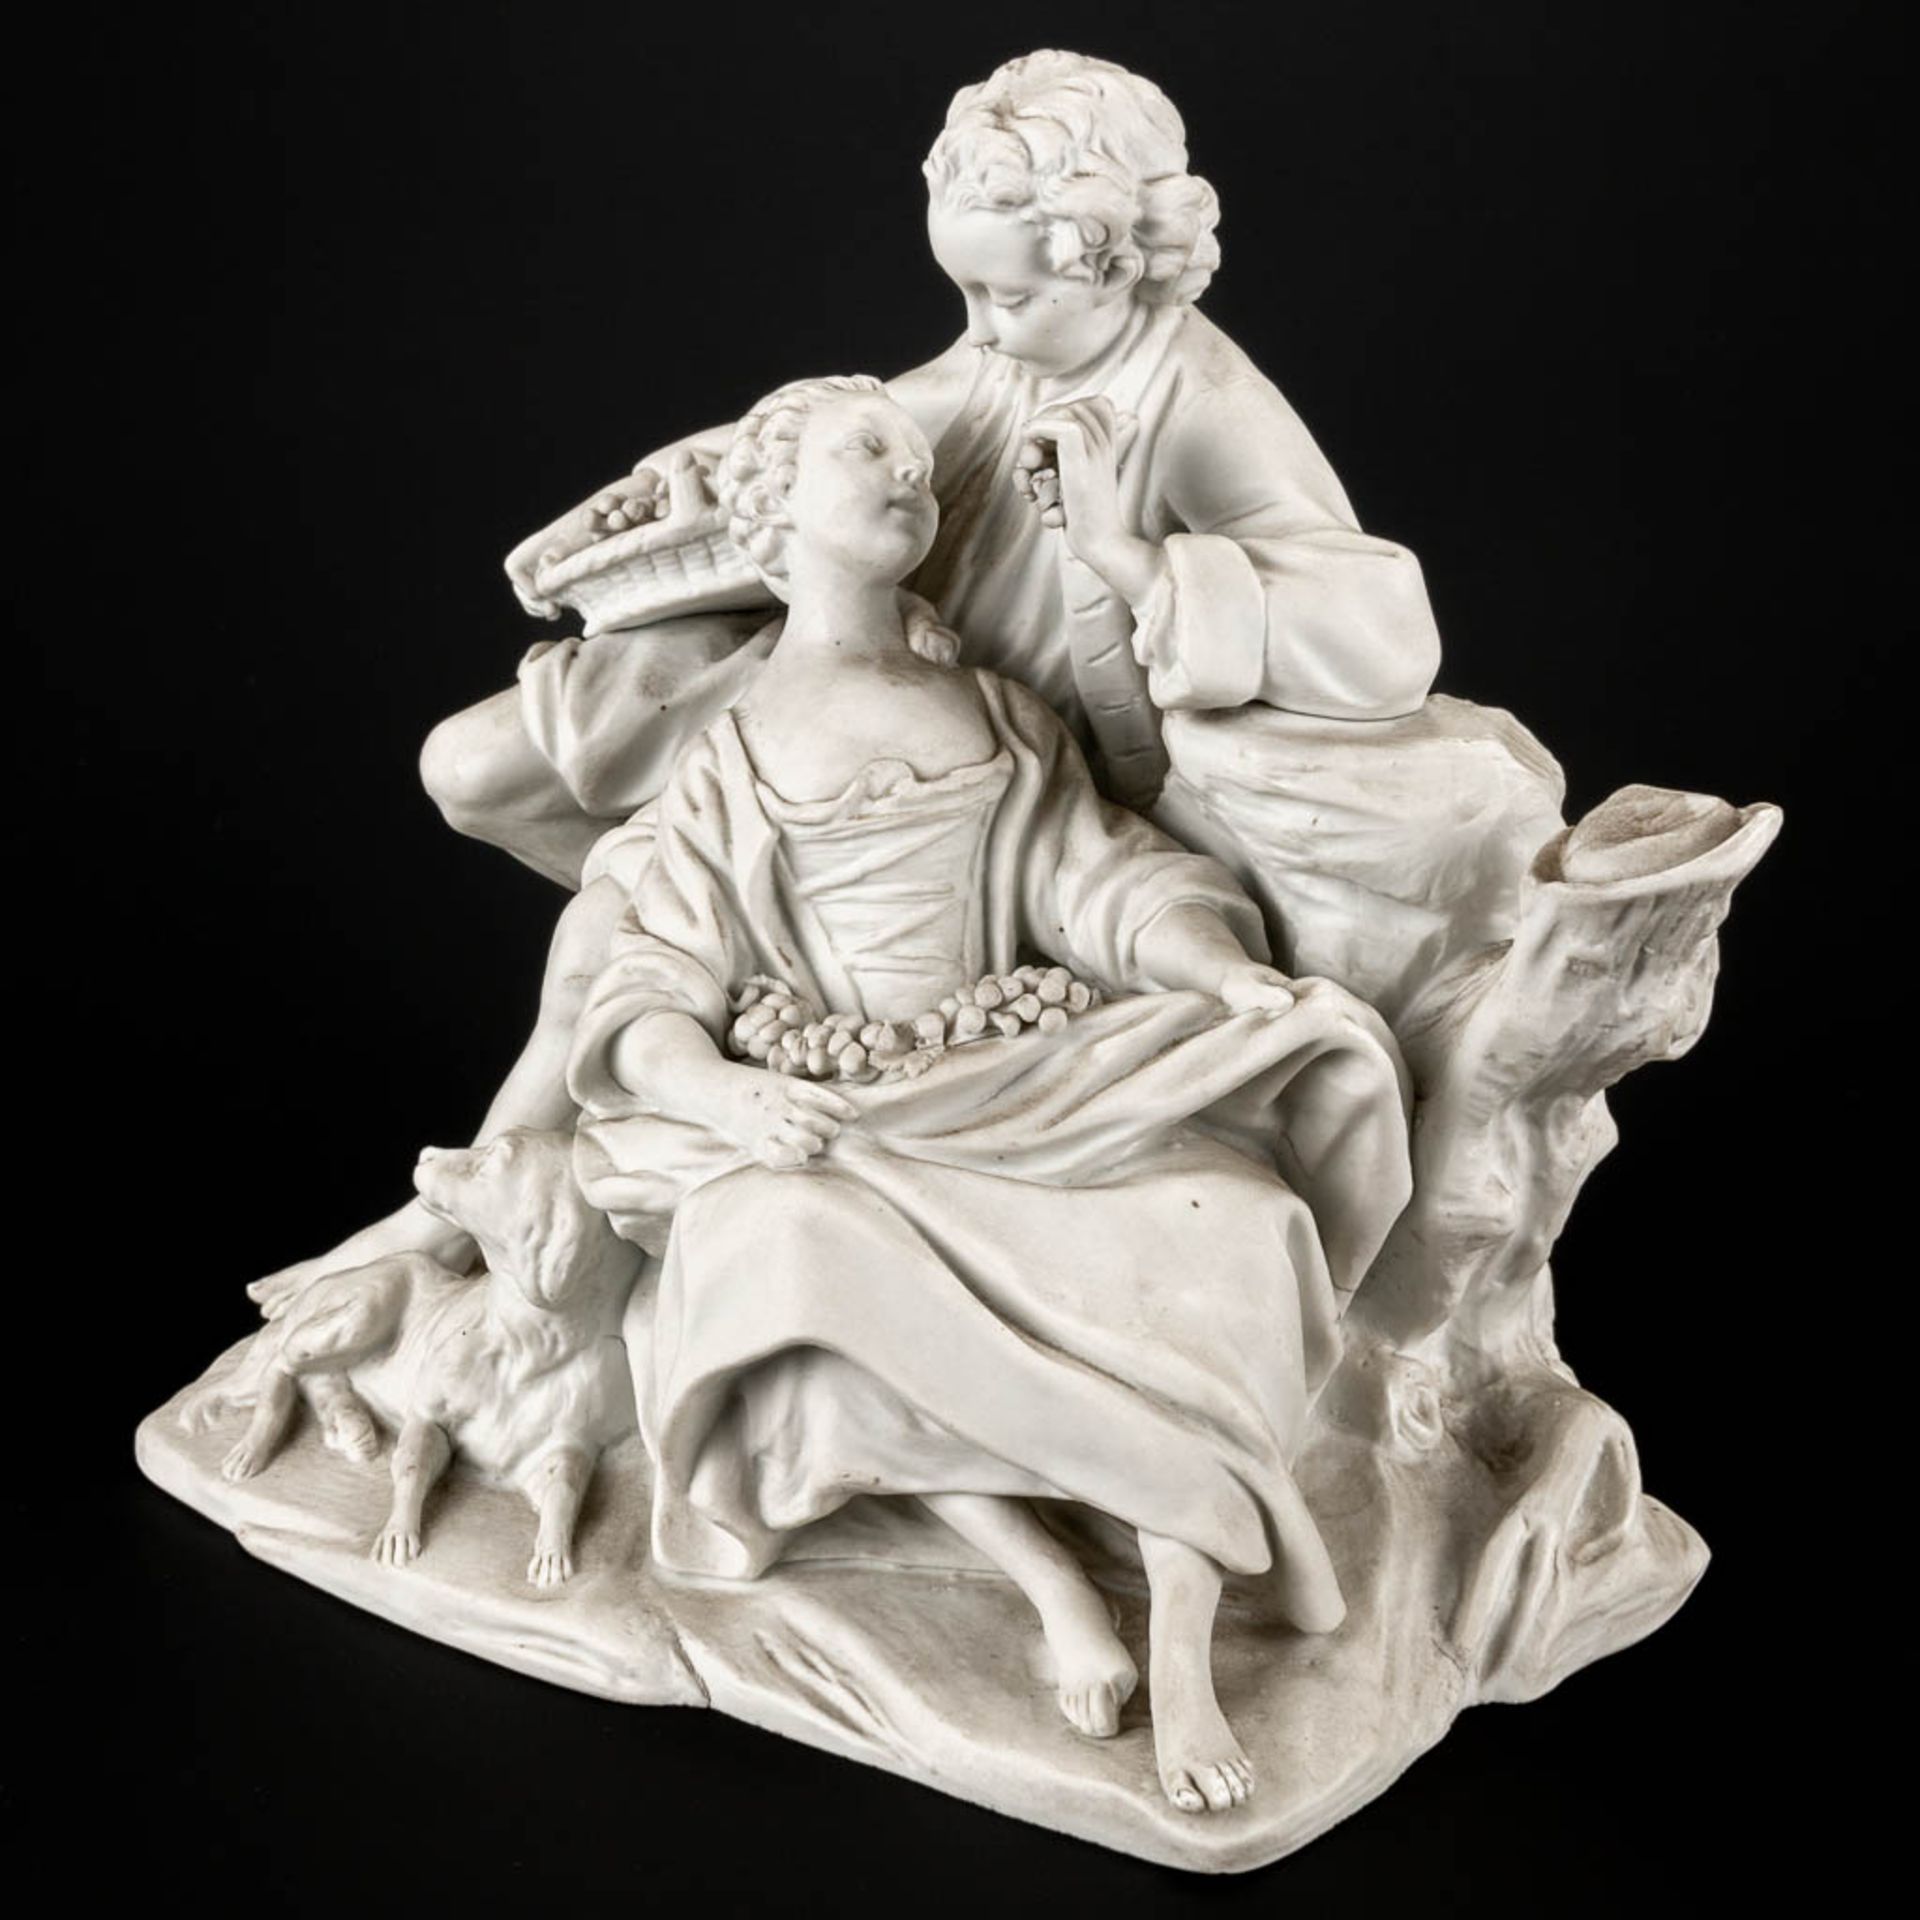 A romantic scene made of biscuit porcelain and marked Sevres. 19th century. (17 x 23 x 22 cm) - Image 10 of 20